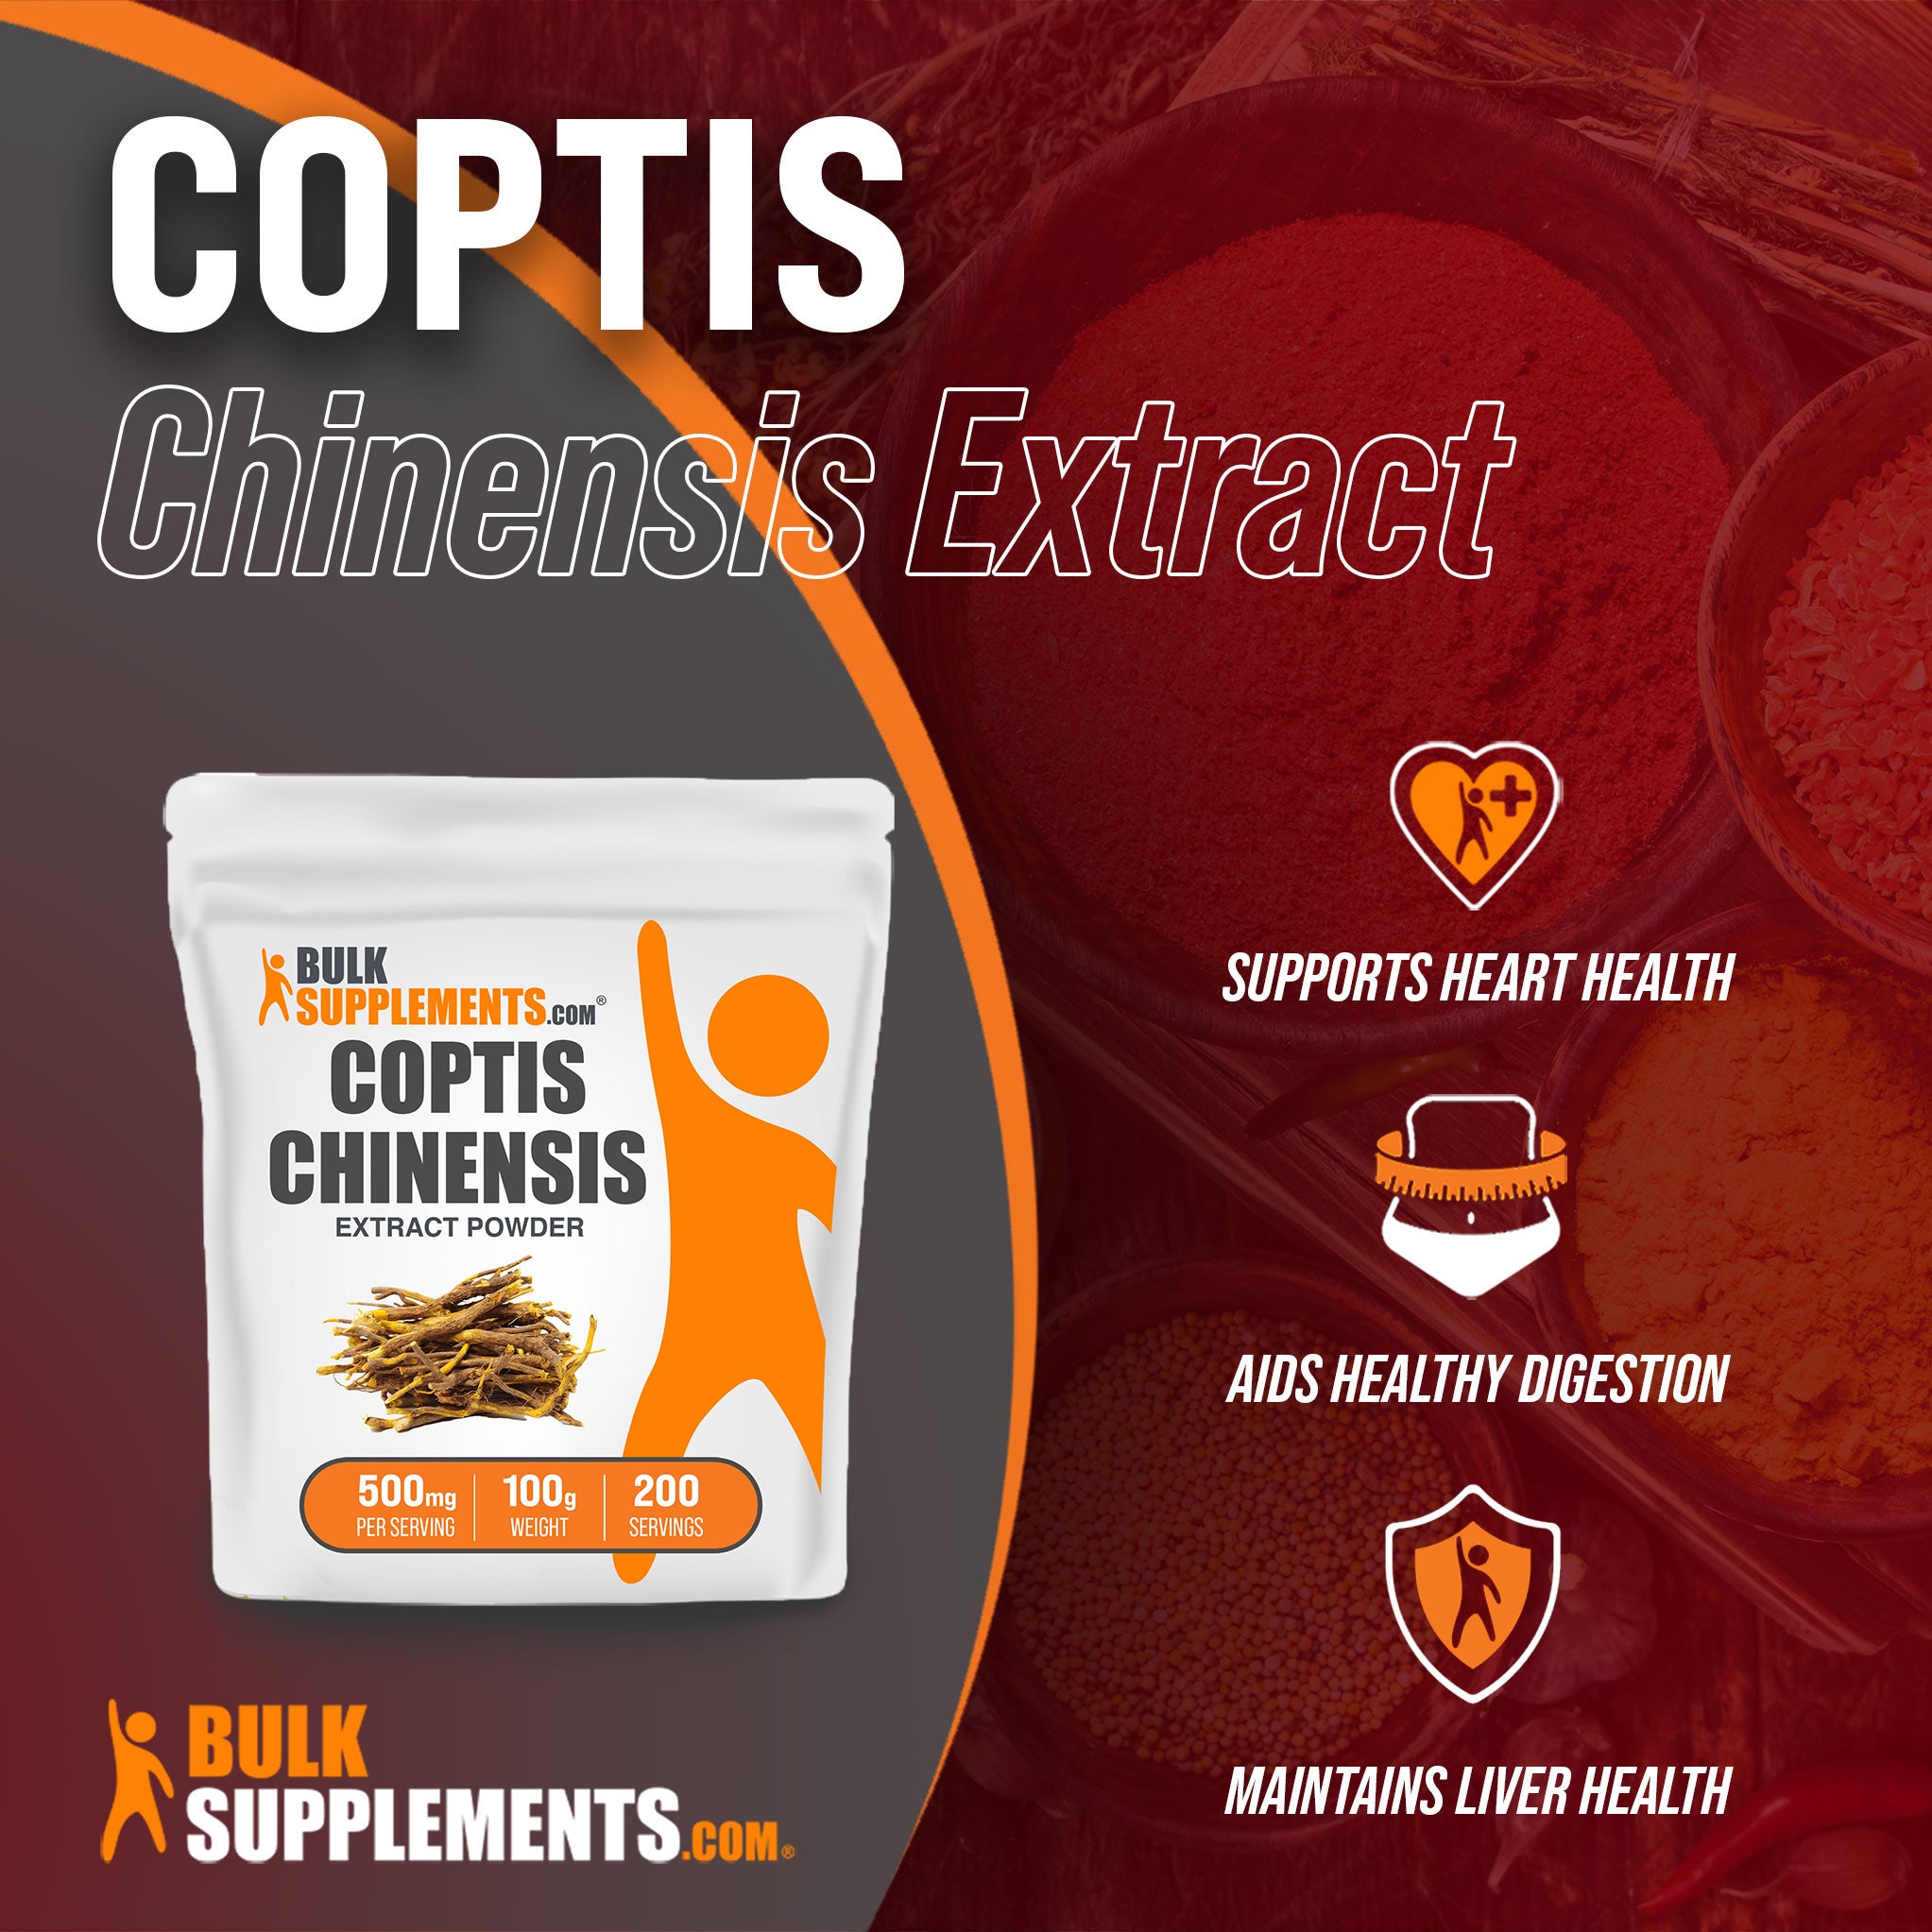 Benefits of 100g Coptis Chinensis; supports heart health, aids healthy digestion, maintains liver health